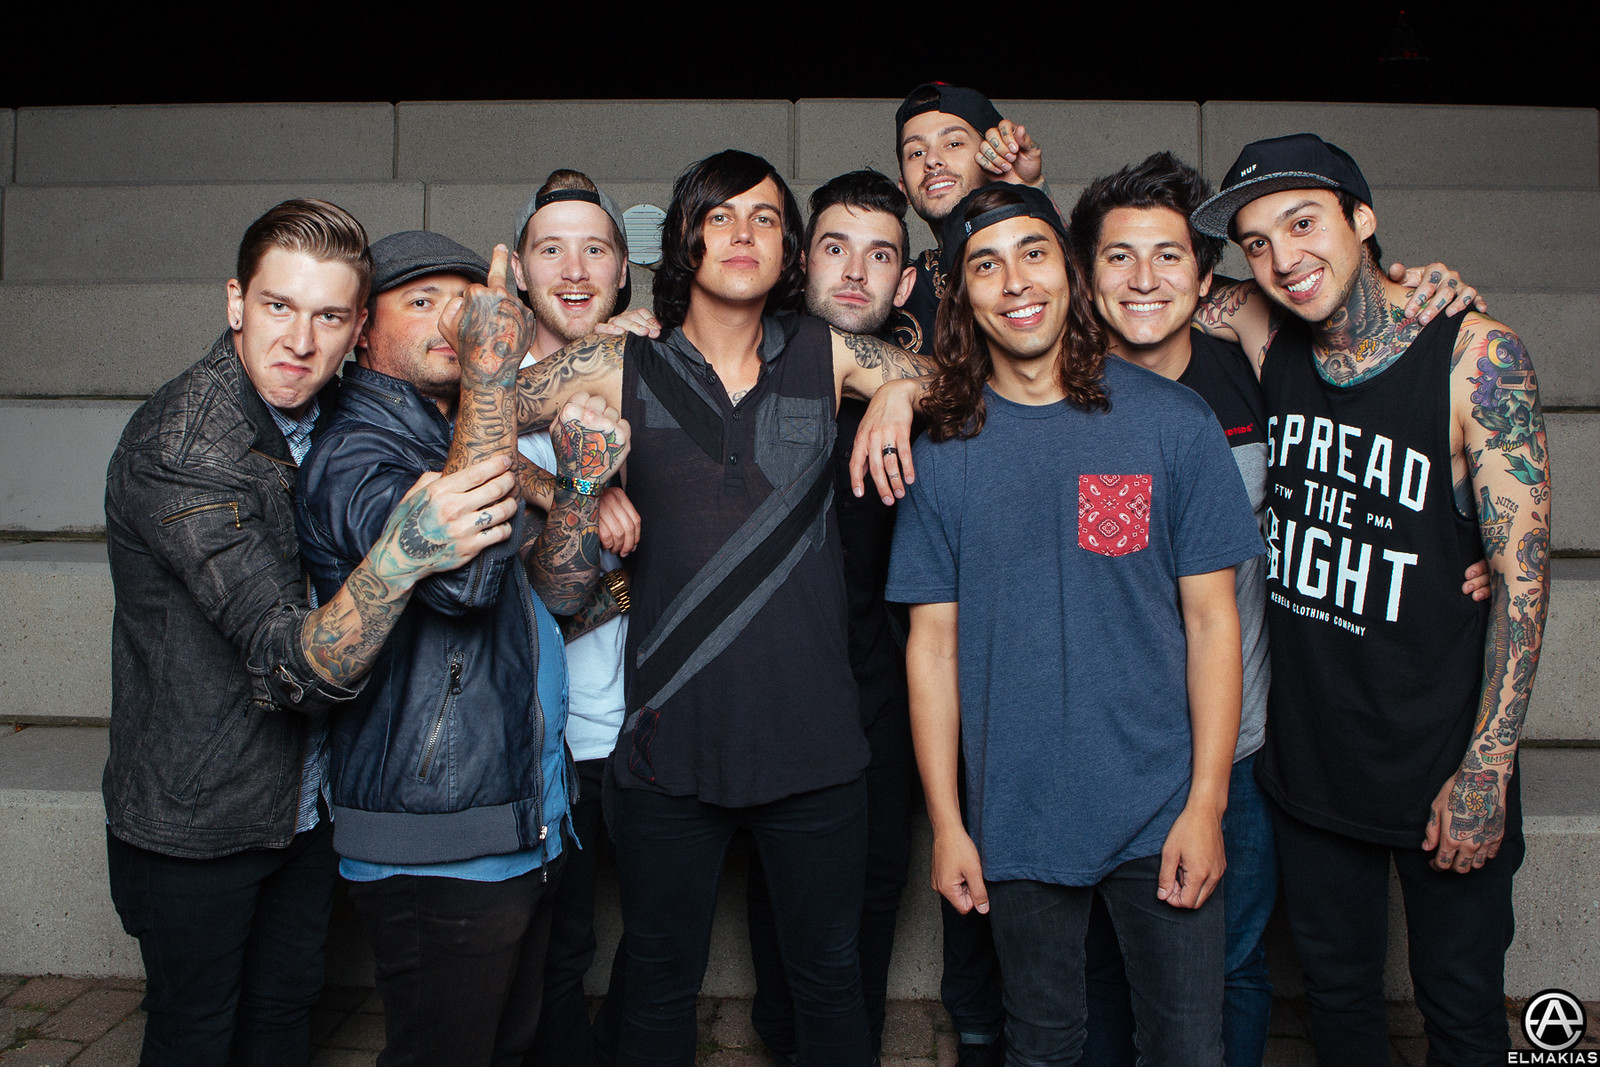 Pierce The Veil and Sleeping with Sirens candid photo from The World Tour shoot